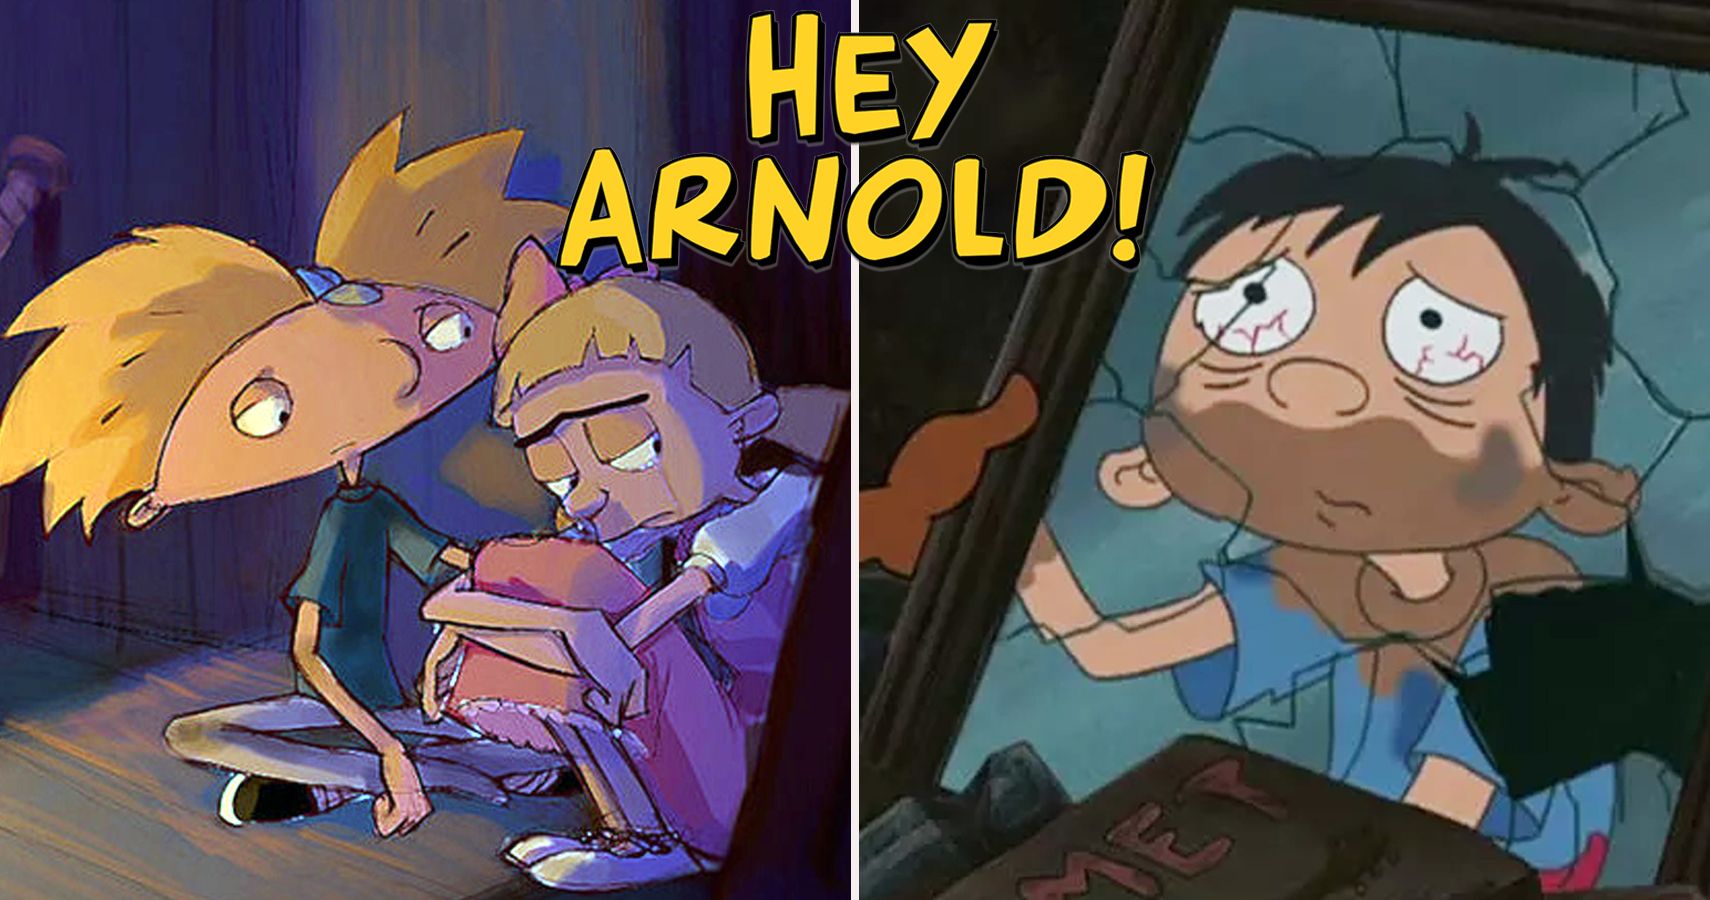 Dark Secrets About Hey Arnold You Really Don't Want To Know